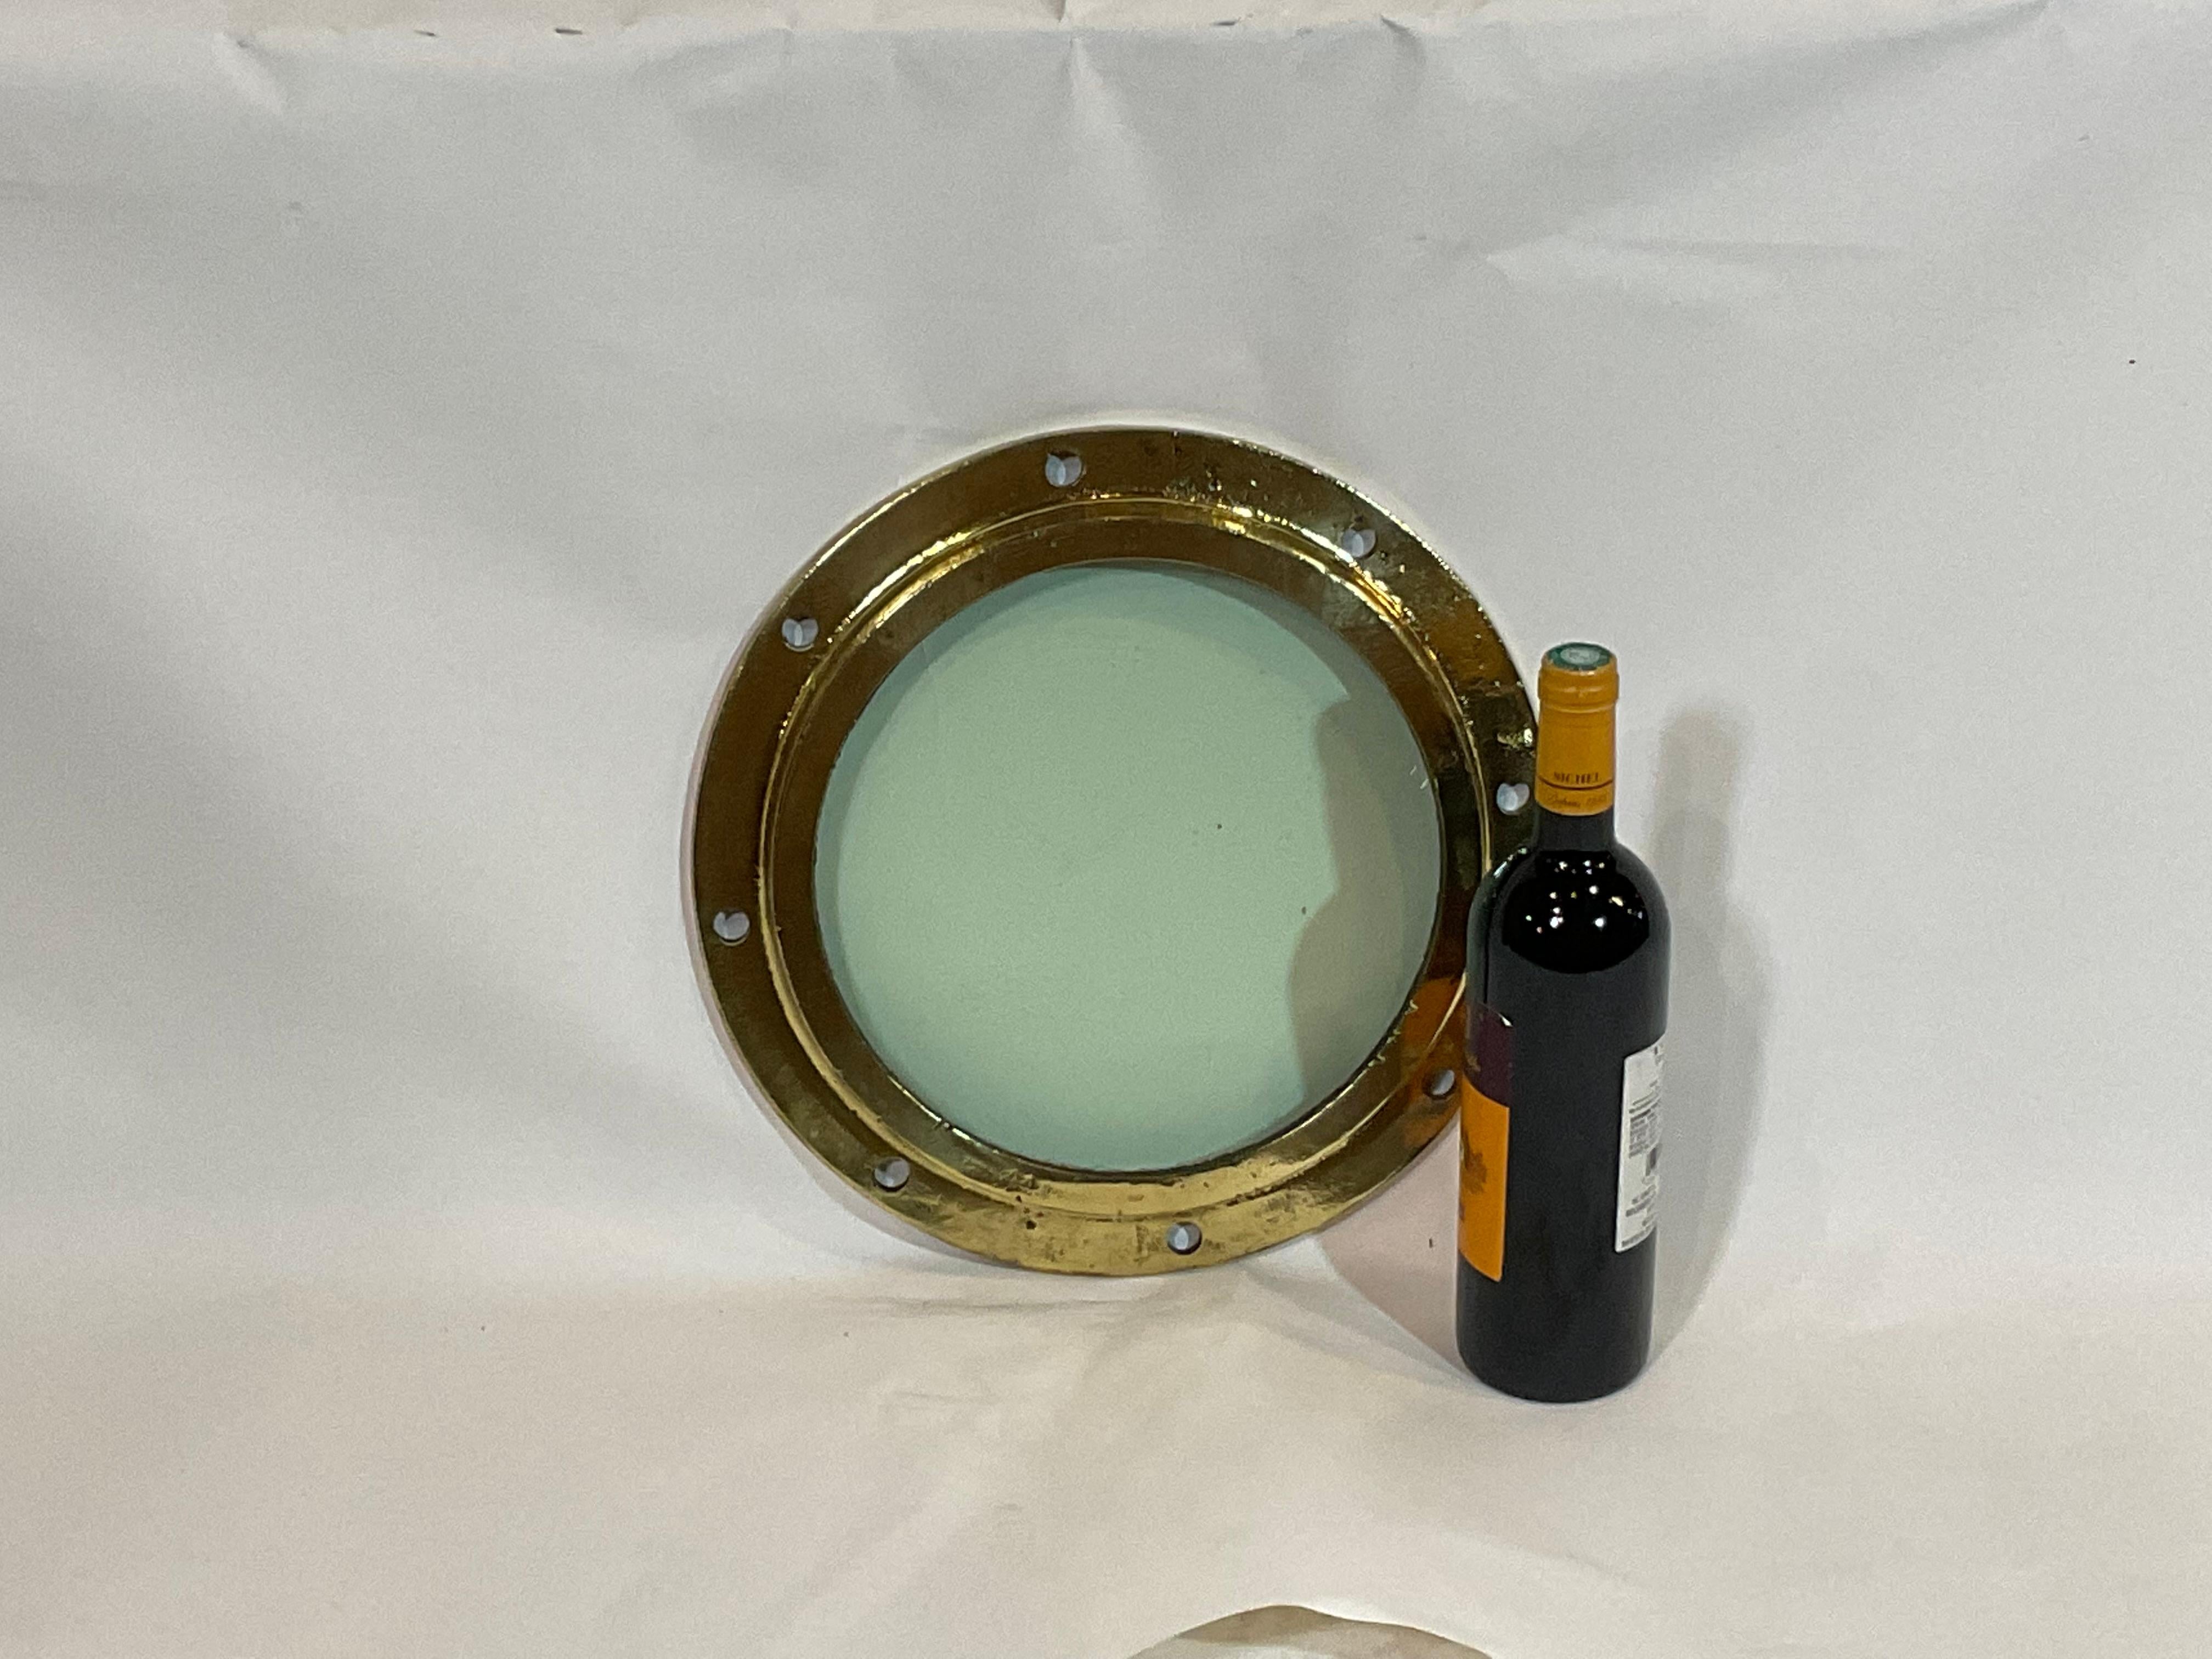 Solid brass highly polished ships portlight with tempered glass. The glass has imperfections from years at sea. This porthole has been polished and lacquered.

Weight: 16 LBS
Overall Dimensions: 2” Height x 14” Diameter
Glass 9 1/2